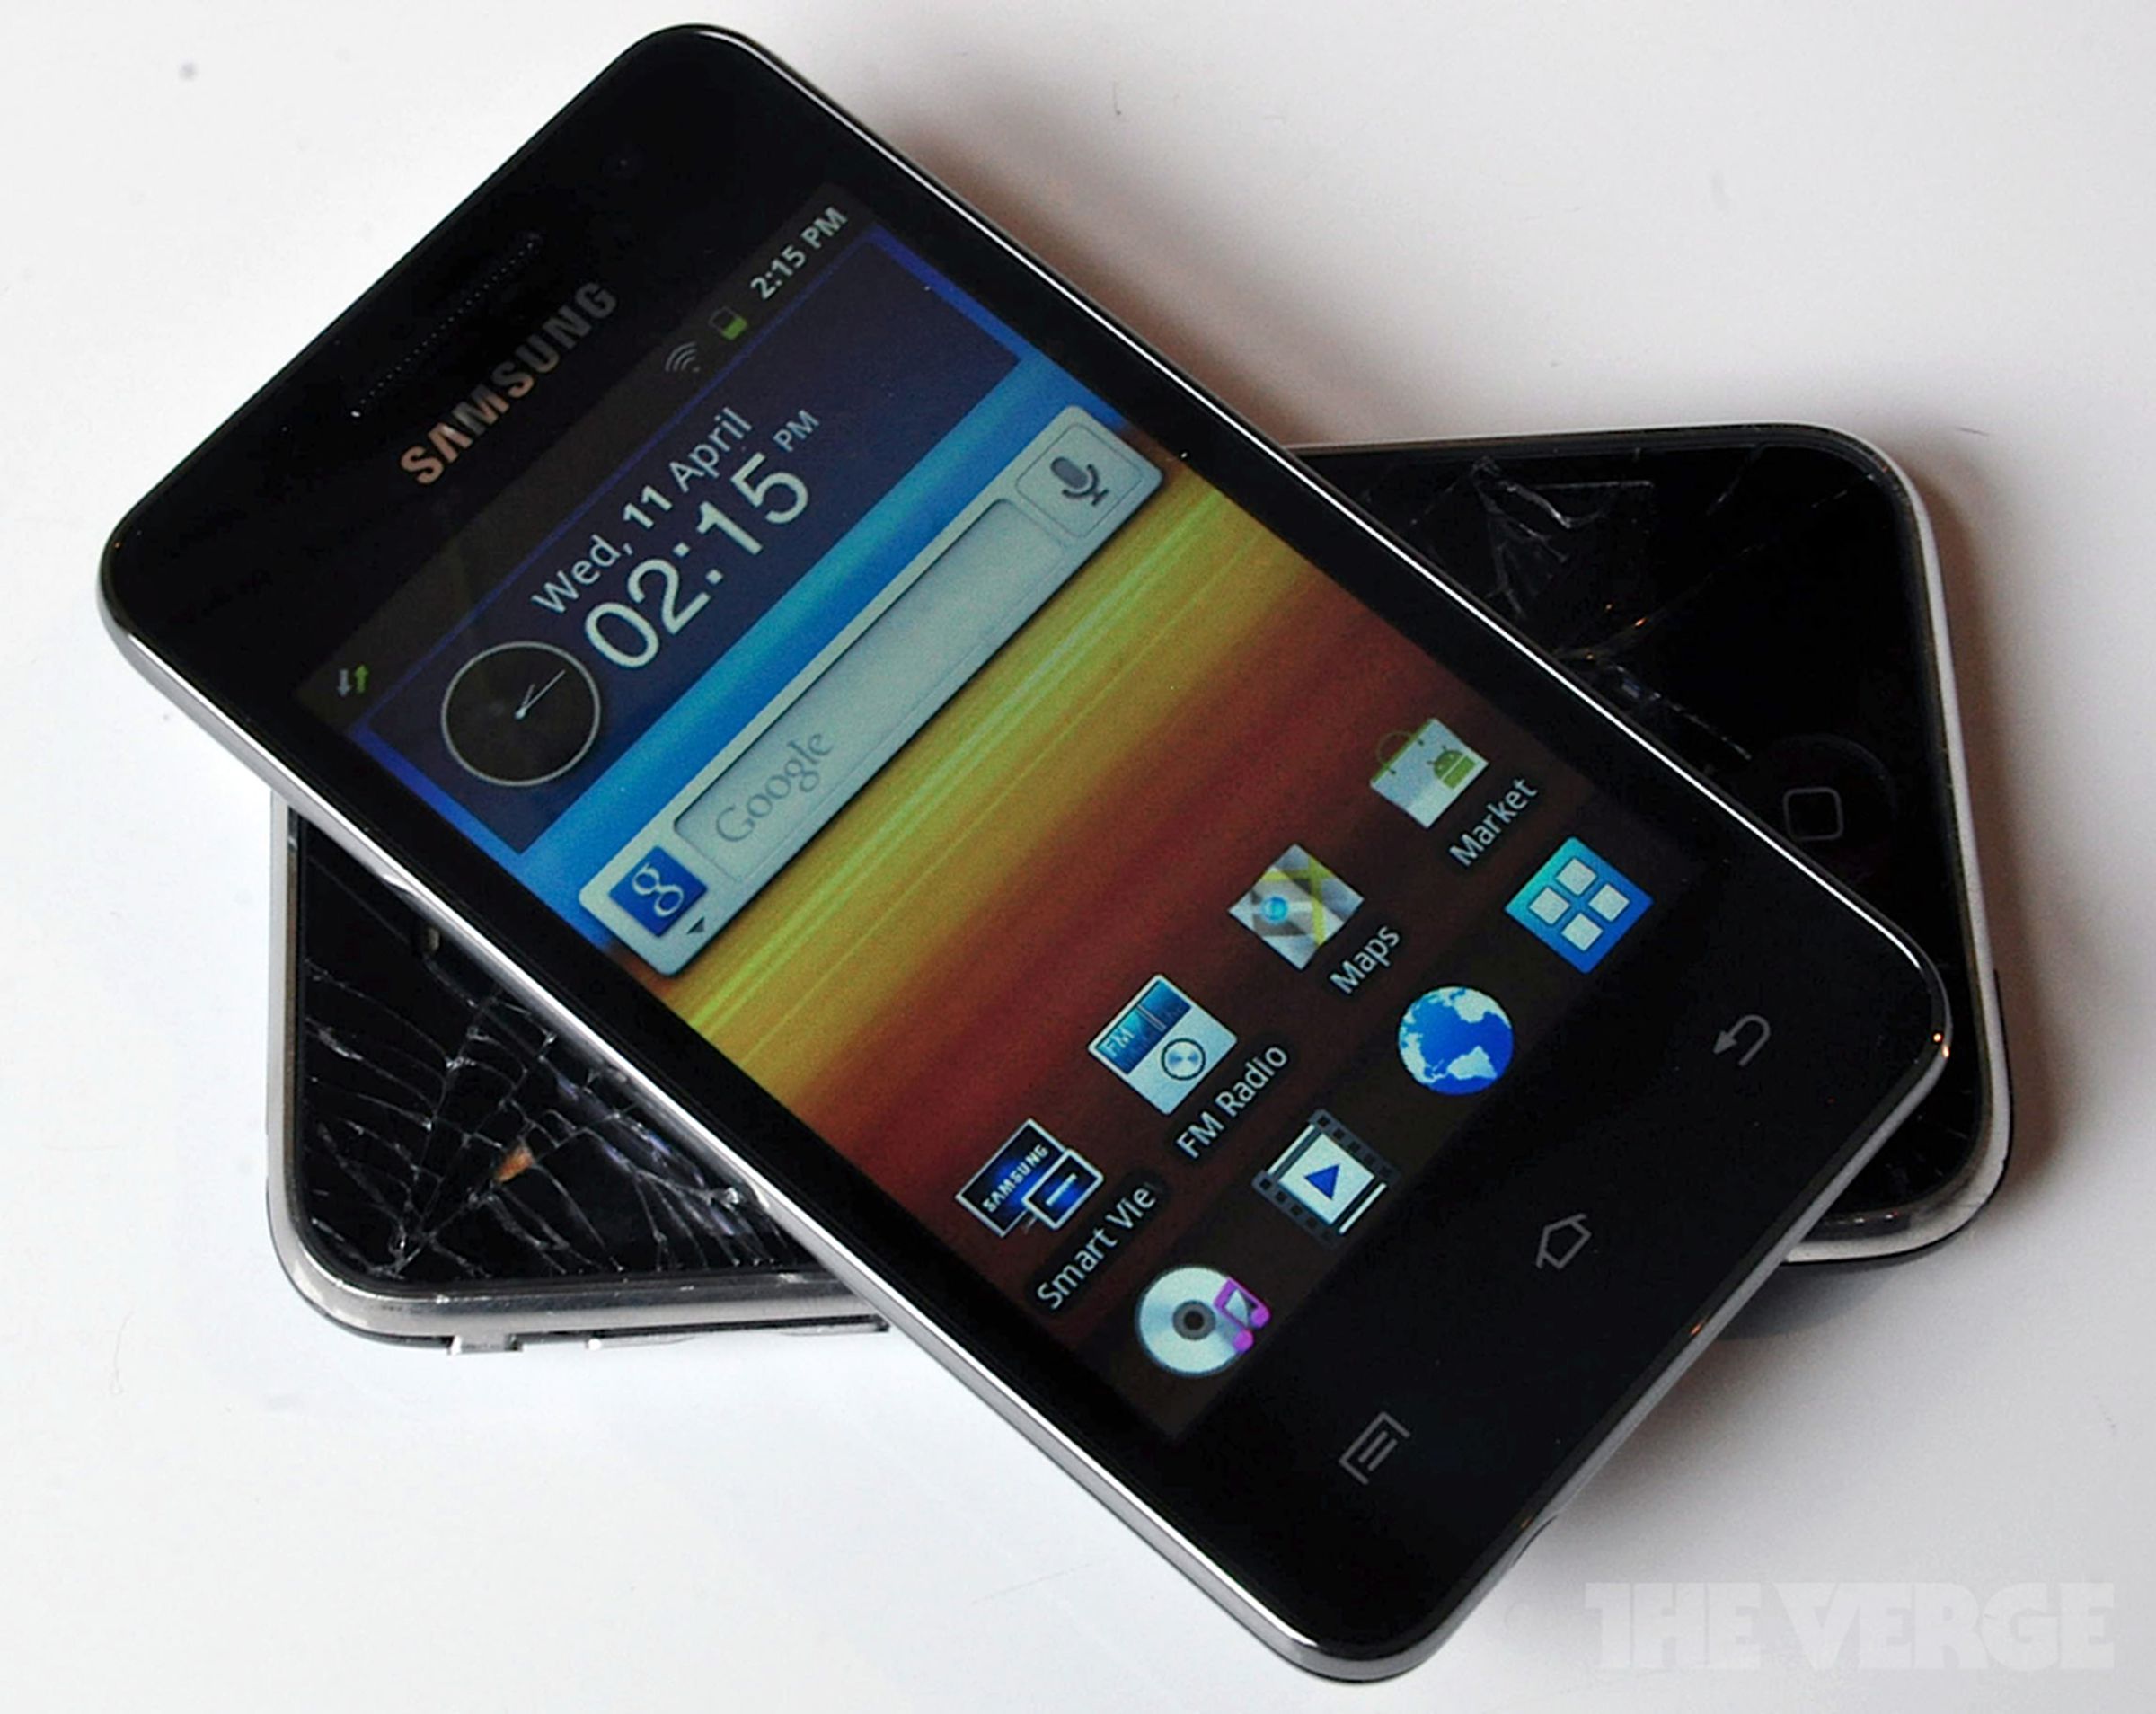 Samsung Galaxy Player 3.6 hands-on pictures